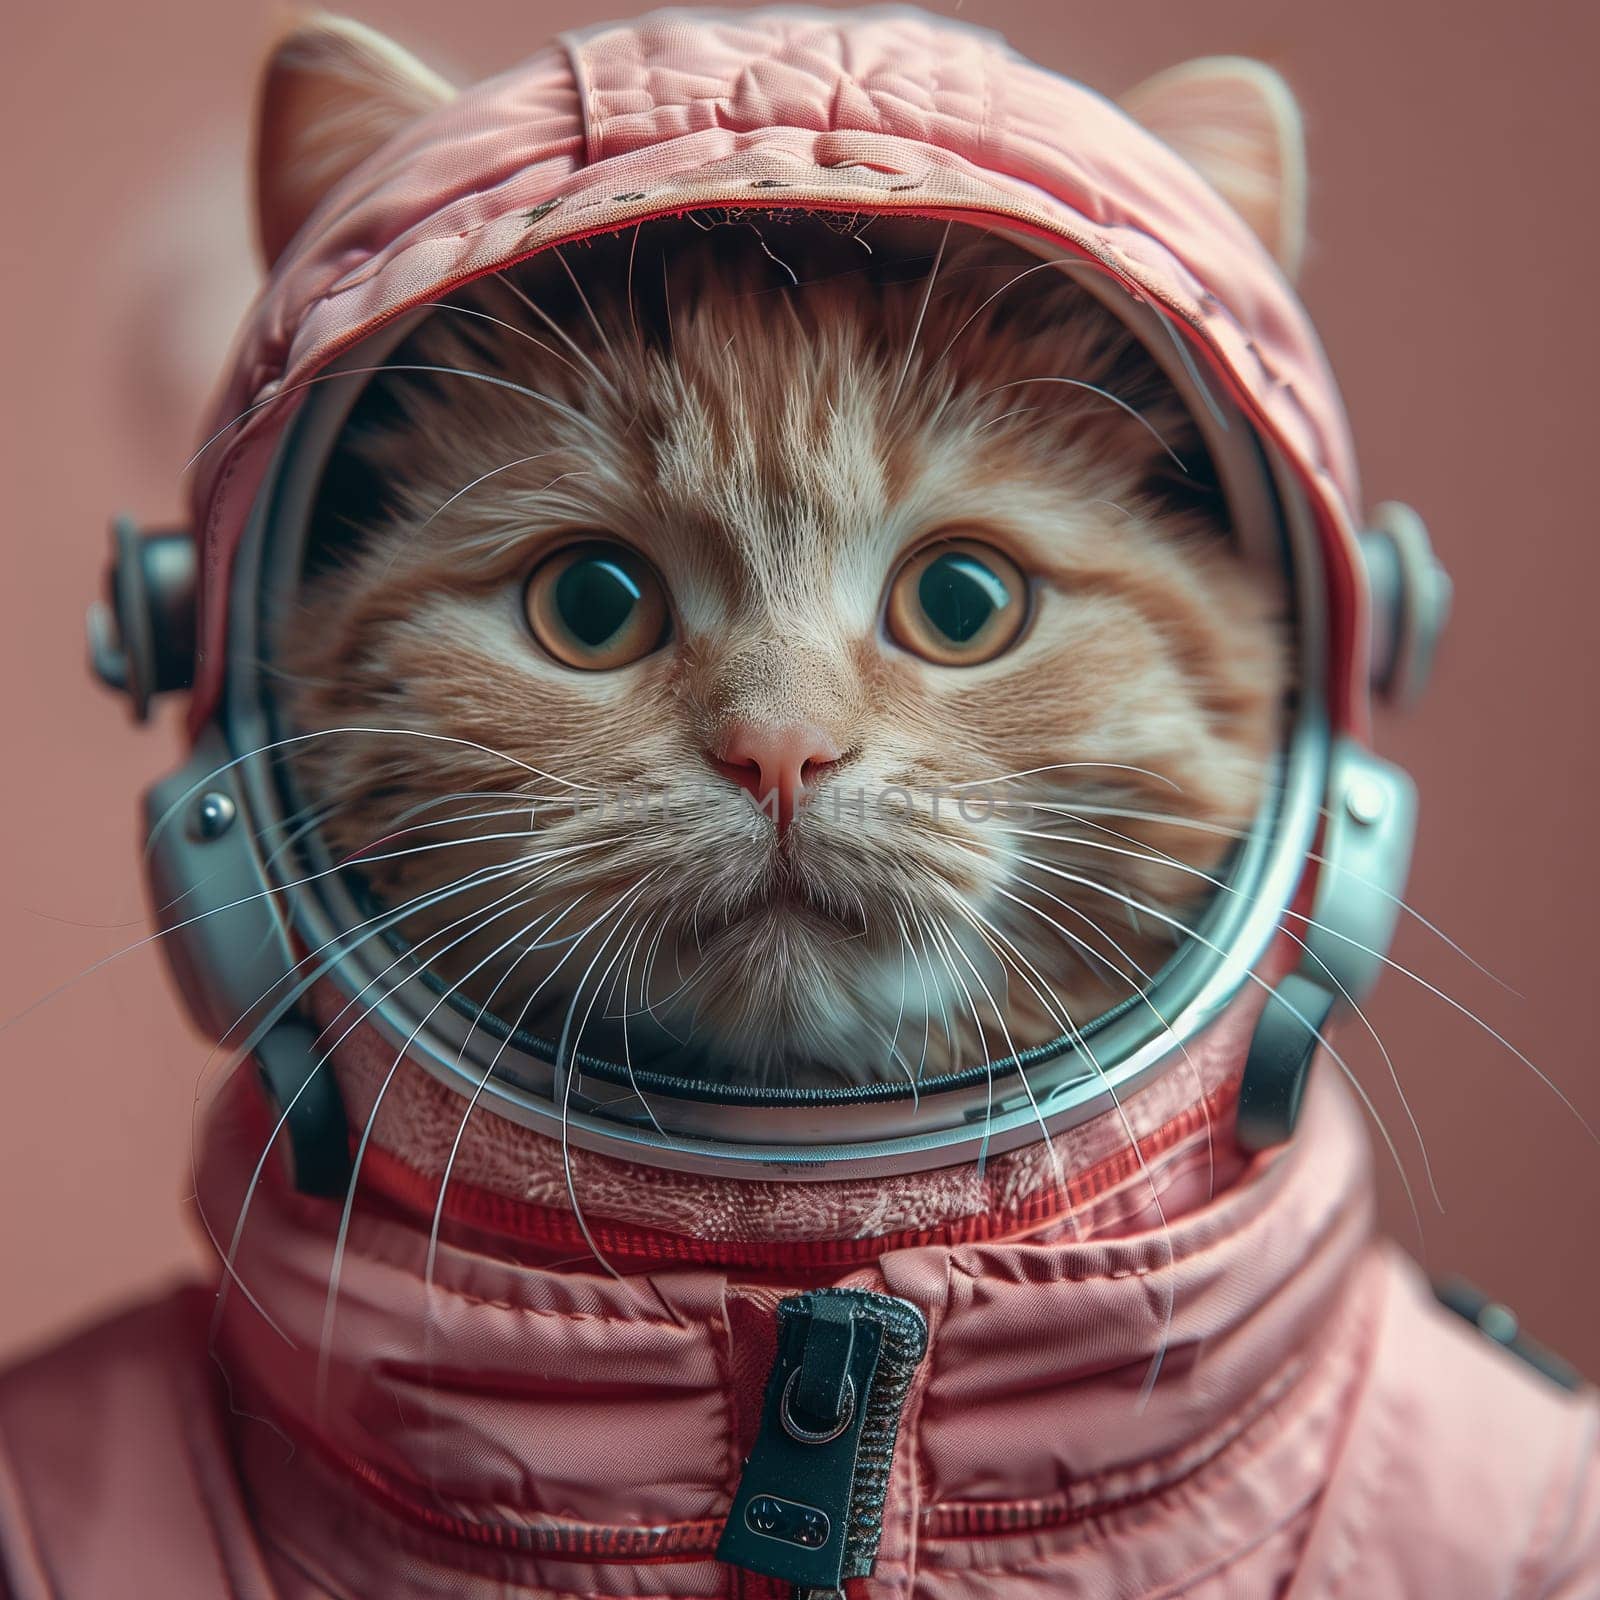 A Felidae wearing a pink space suit and helmet, showcasing its whiskers, snout, and fur. The outfit acts as both a fashion accessory and personal protective equipment, with added eyewear